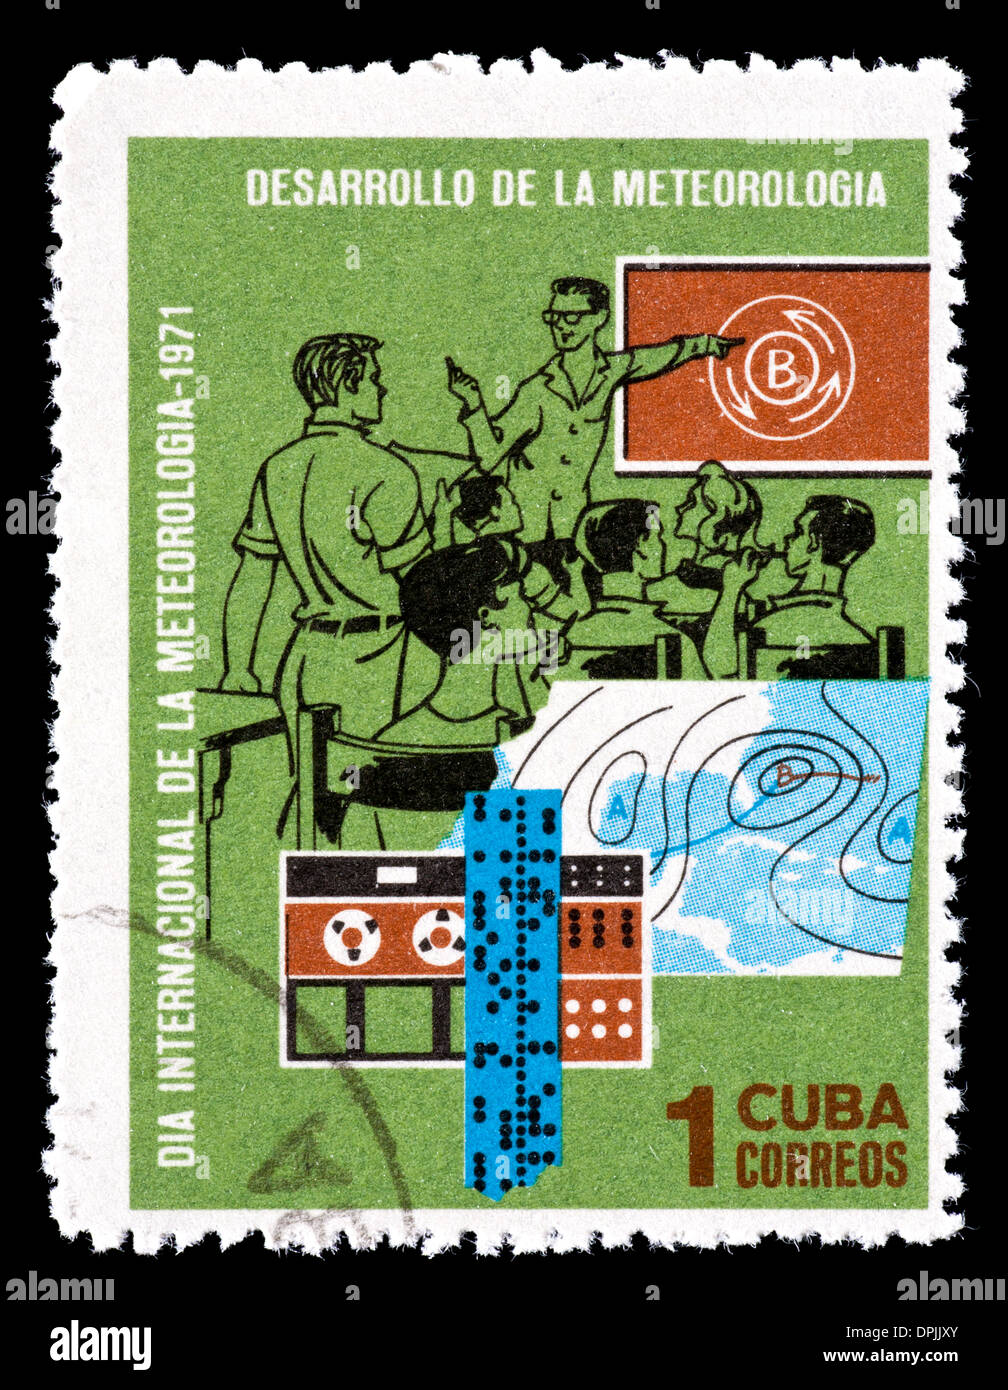 Postage stamp from Cuba depicting a class, weather chart and computer,  issued for World Meteorology Day Stock Photo - Alamy